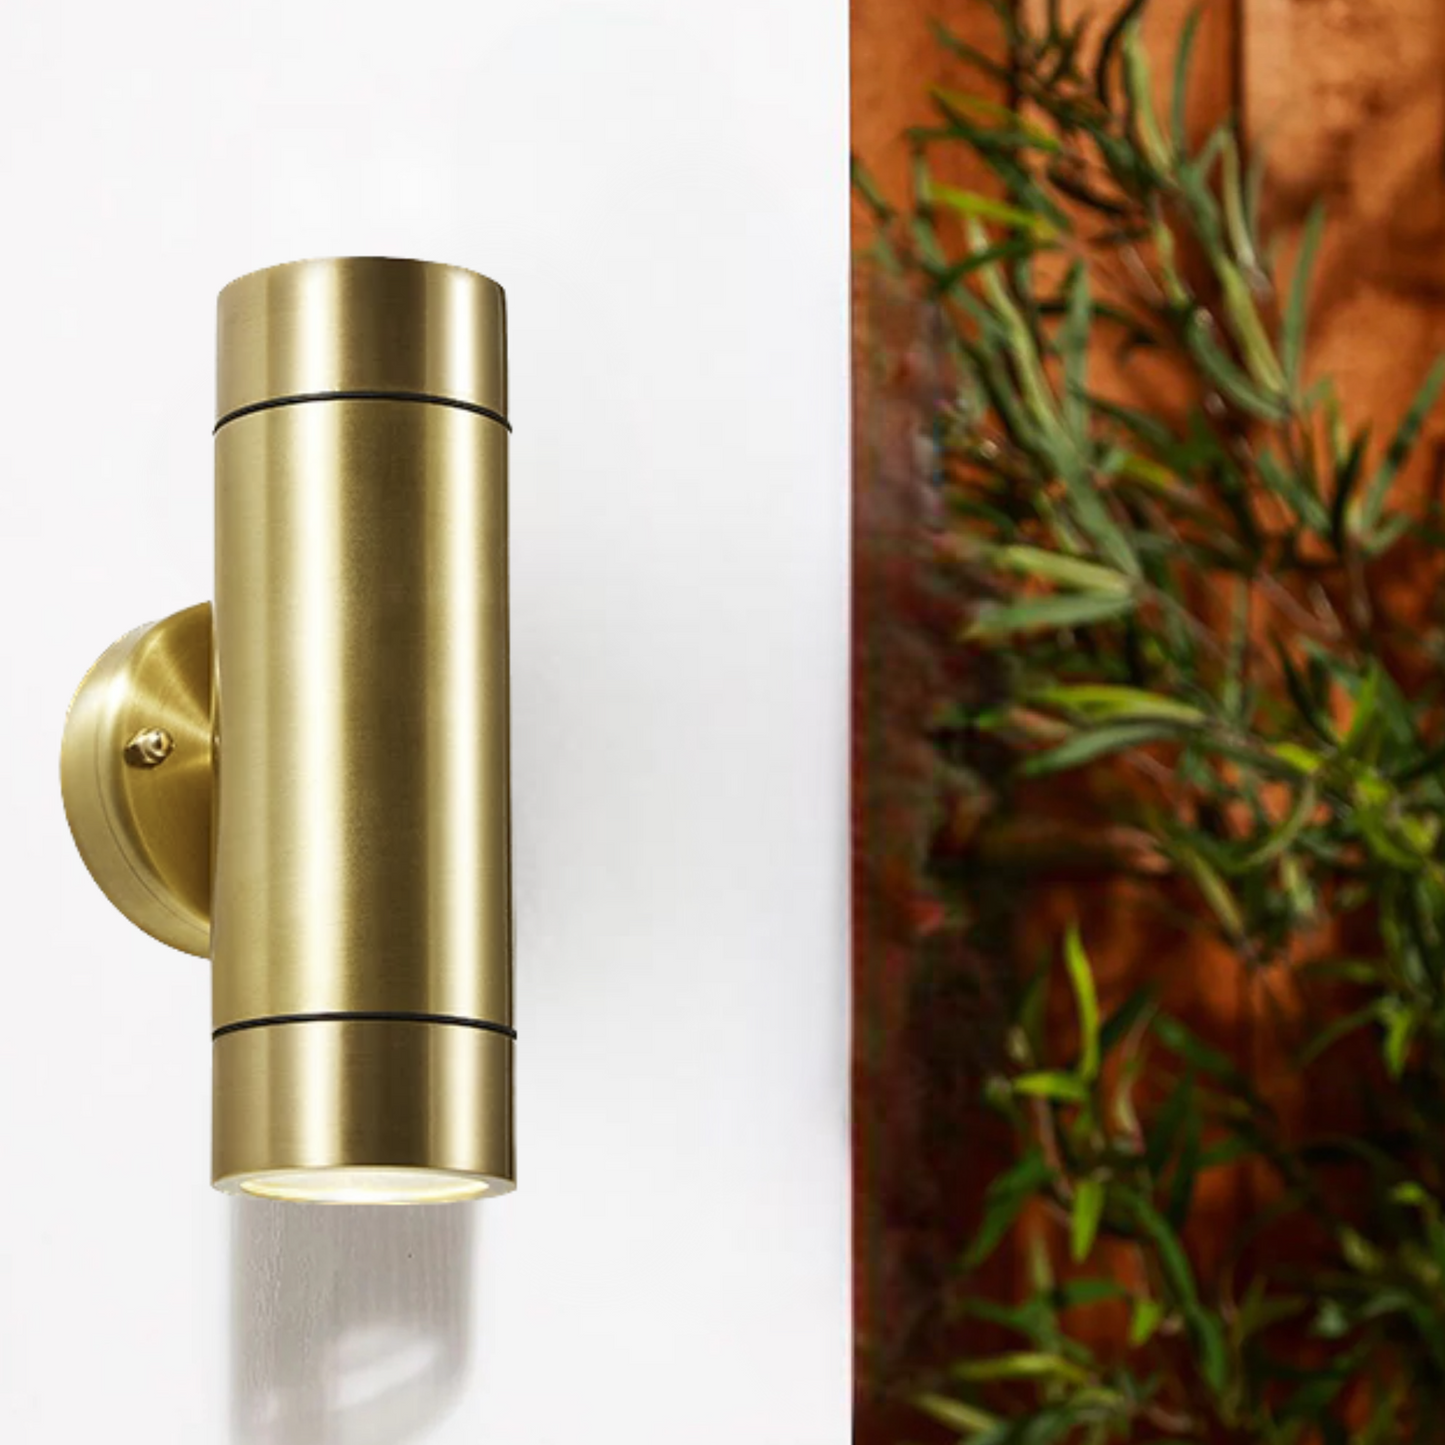 Our Lucas brass double up and  down outdoor wall mounted single cylinder outdoor light would look perfect in a modern or more traditional home design. Outside wall lights can provide atmospheric light in your garden, at the front door or on the terrace as well as a great security solution. It is designed for durability and longevity with its robust material producing a fully weatherproof and water-resistant light fitting. Use LED bulbs to make this light energy efficient and low cost to run.